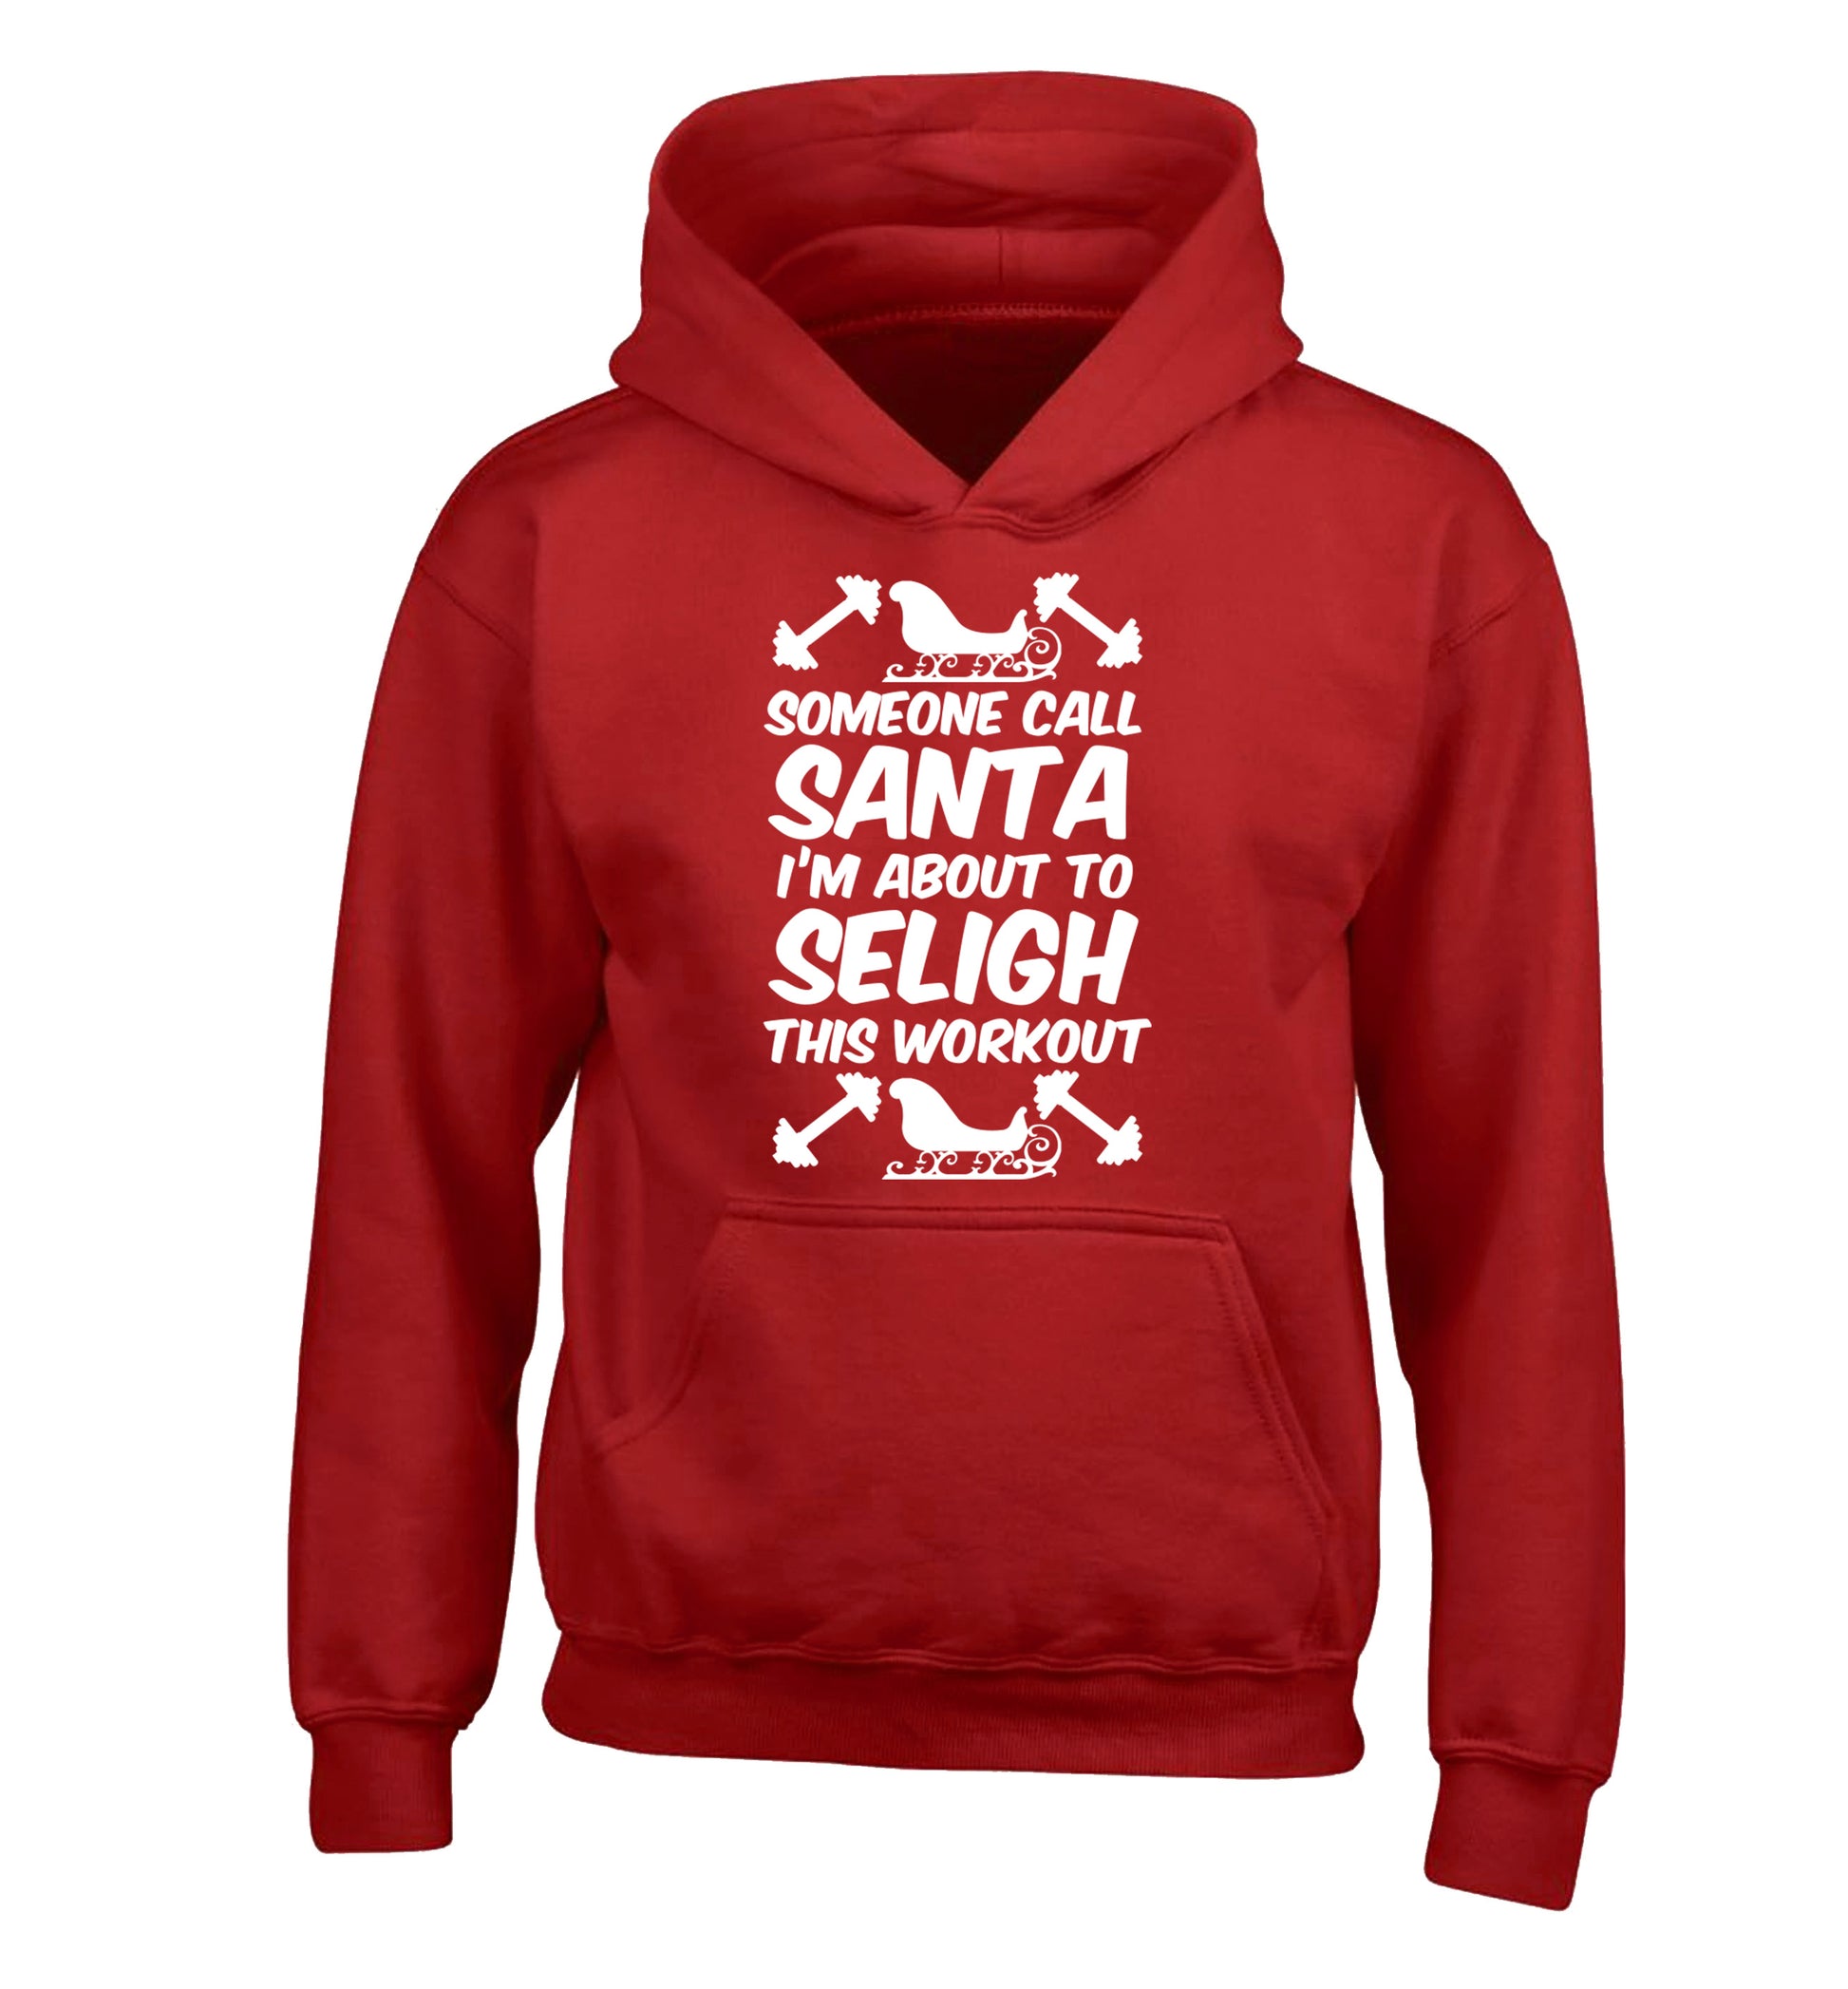 Someone call santa, I'm about to sleigh this workout children's red hoodie 12-14 Years